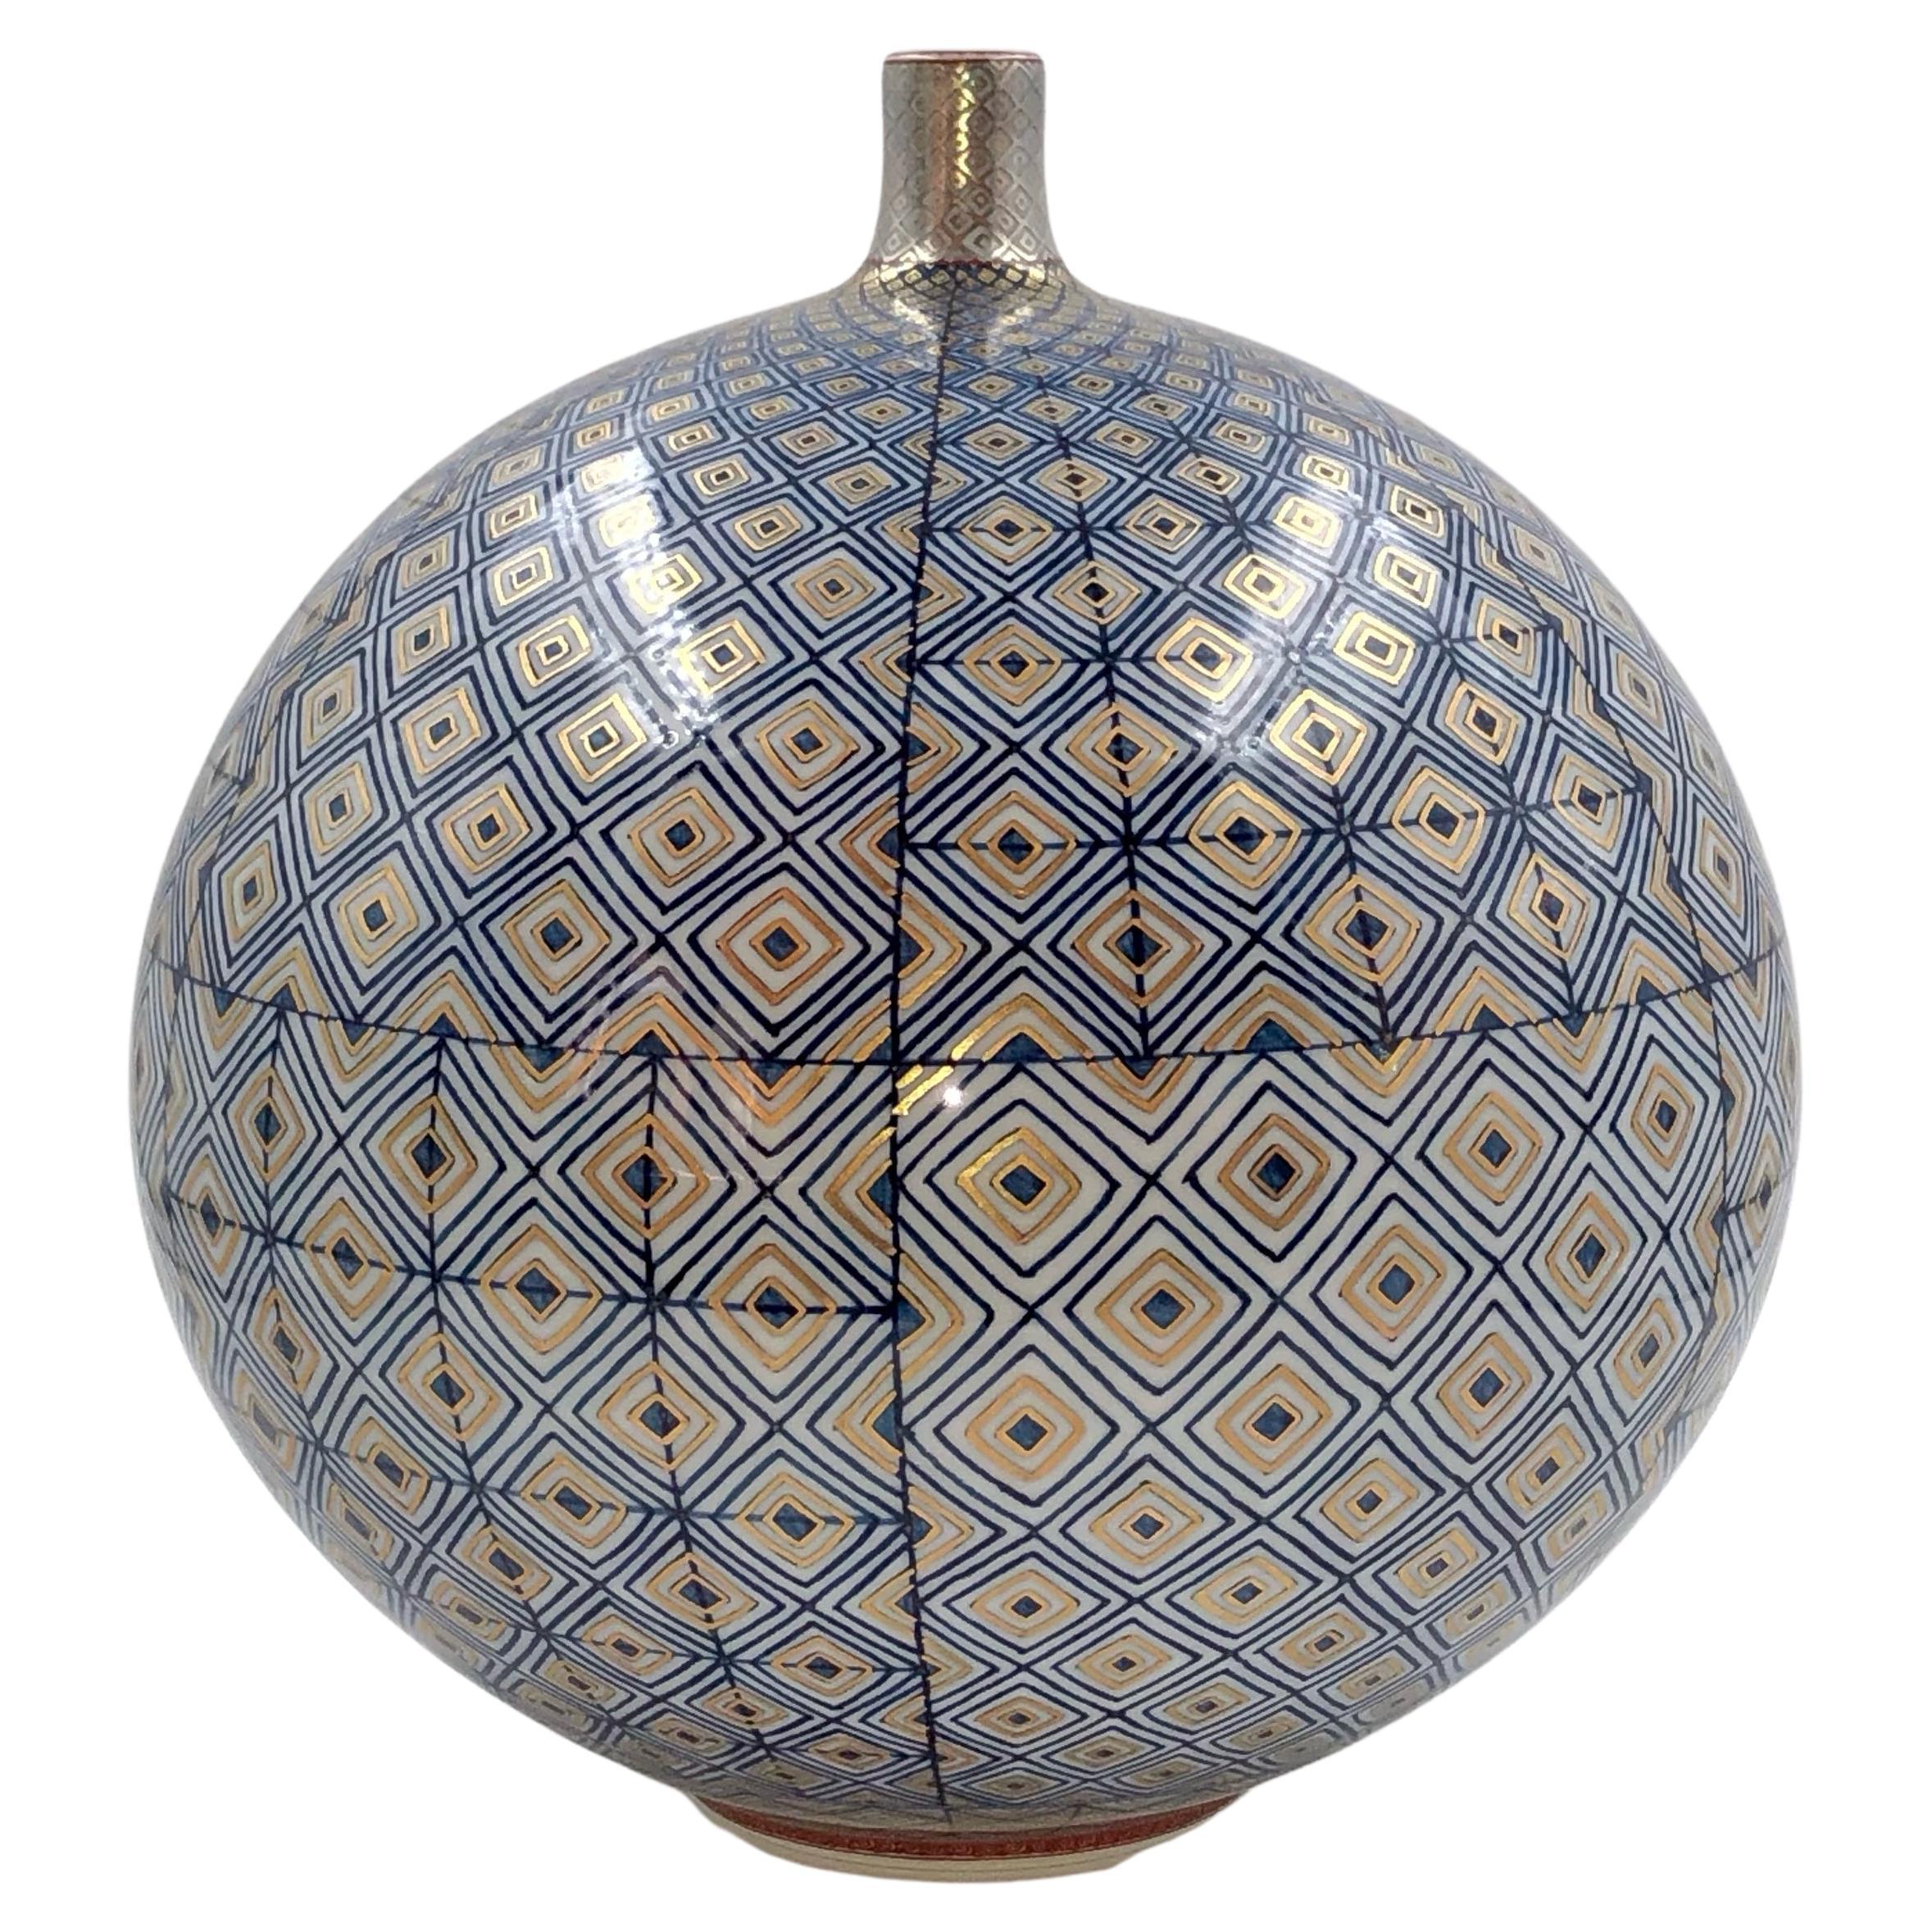 Exquisite Japanese contemporary museum-quality decorative porcelain vase, abreathtaking piece in a stunning ovoid shape featuring the artist's signature geometric pattern, extremely intricately hand painted in stunning midnight blue and gold. It is